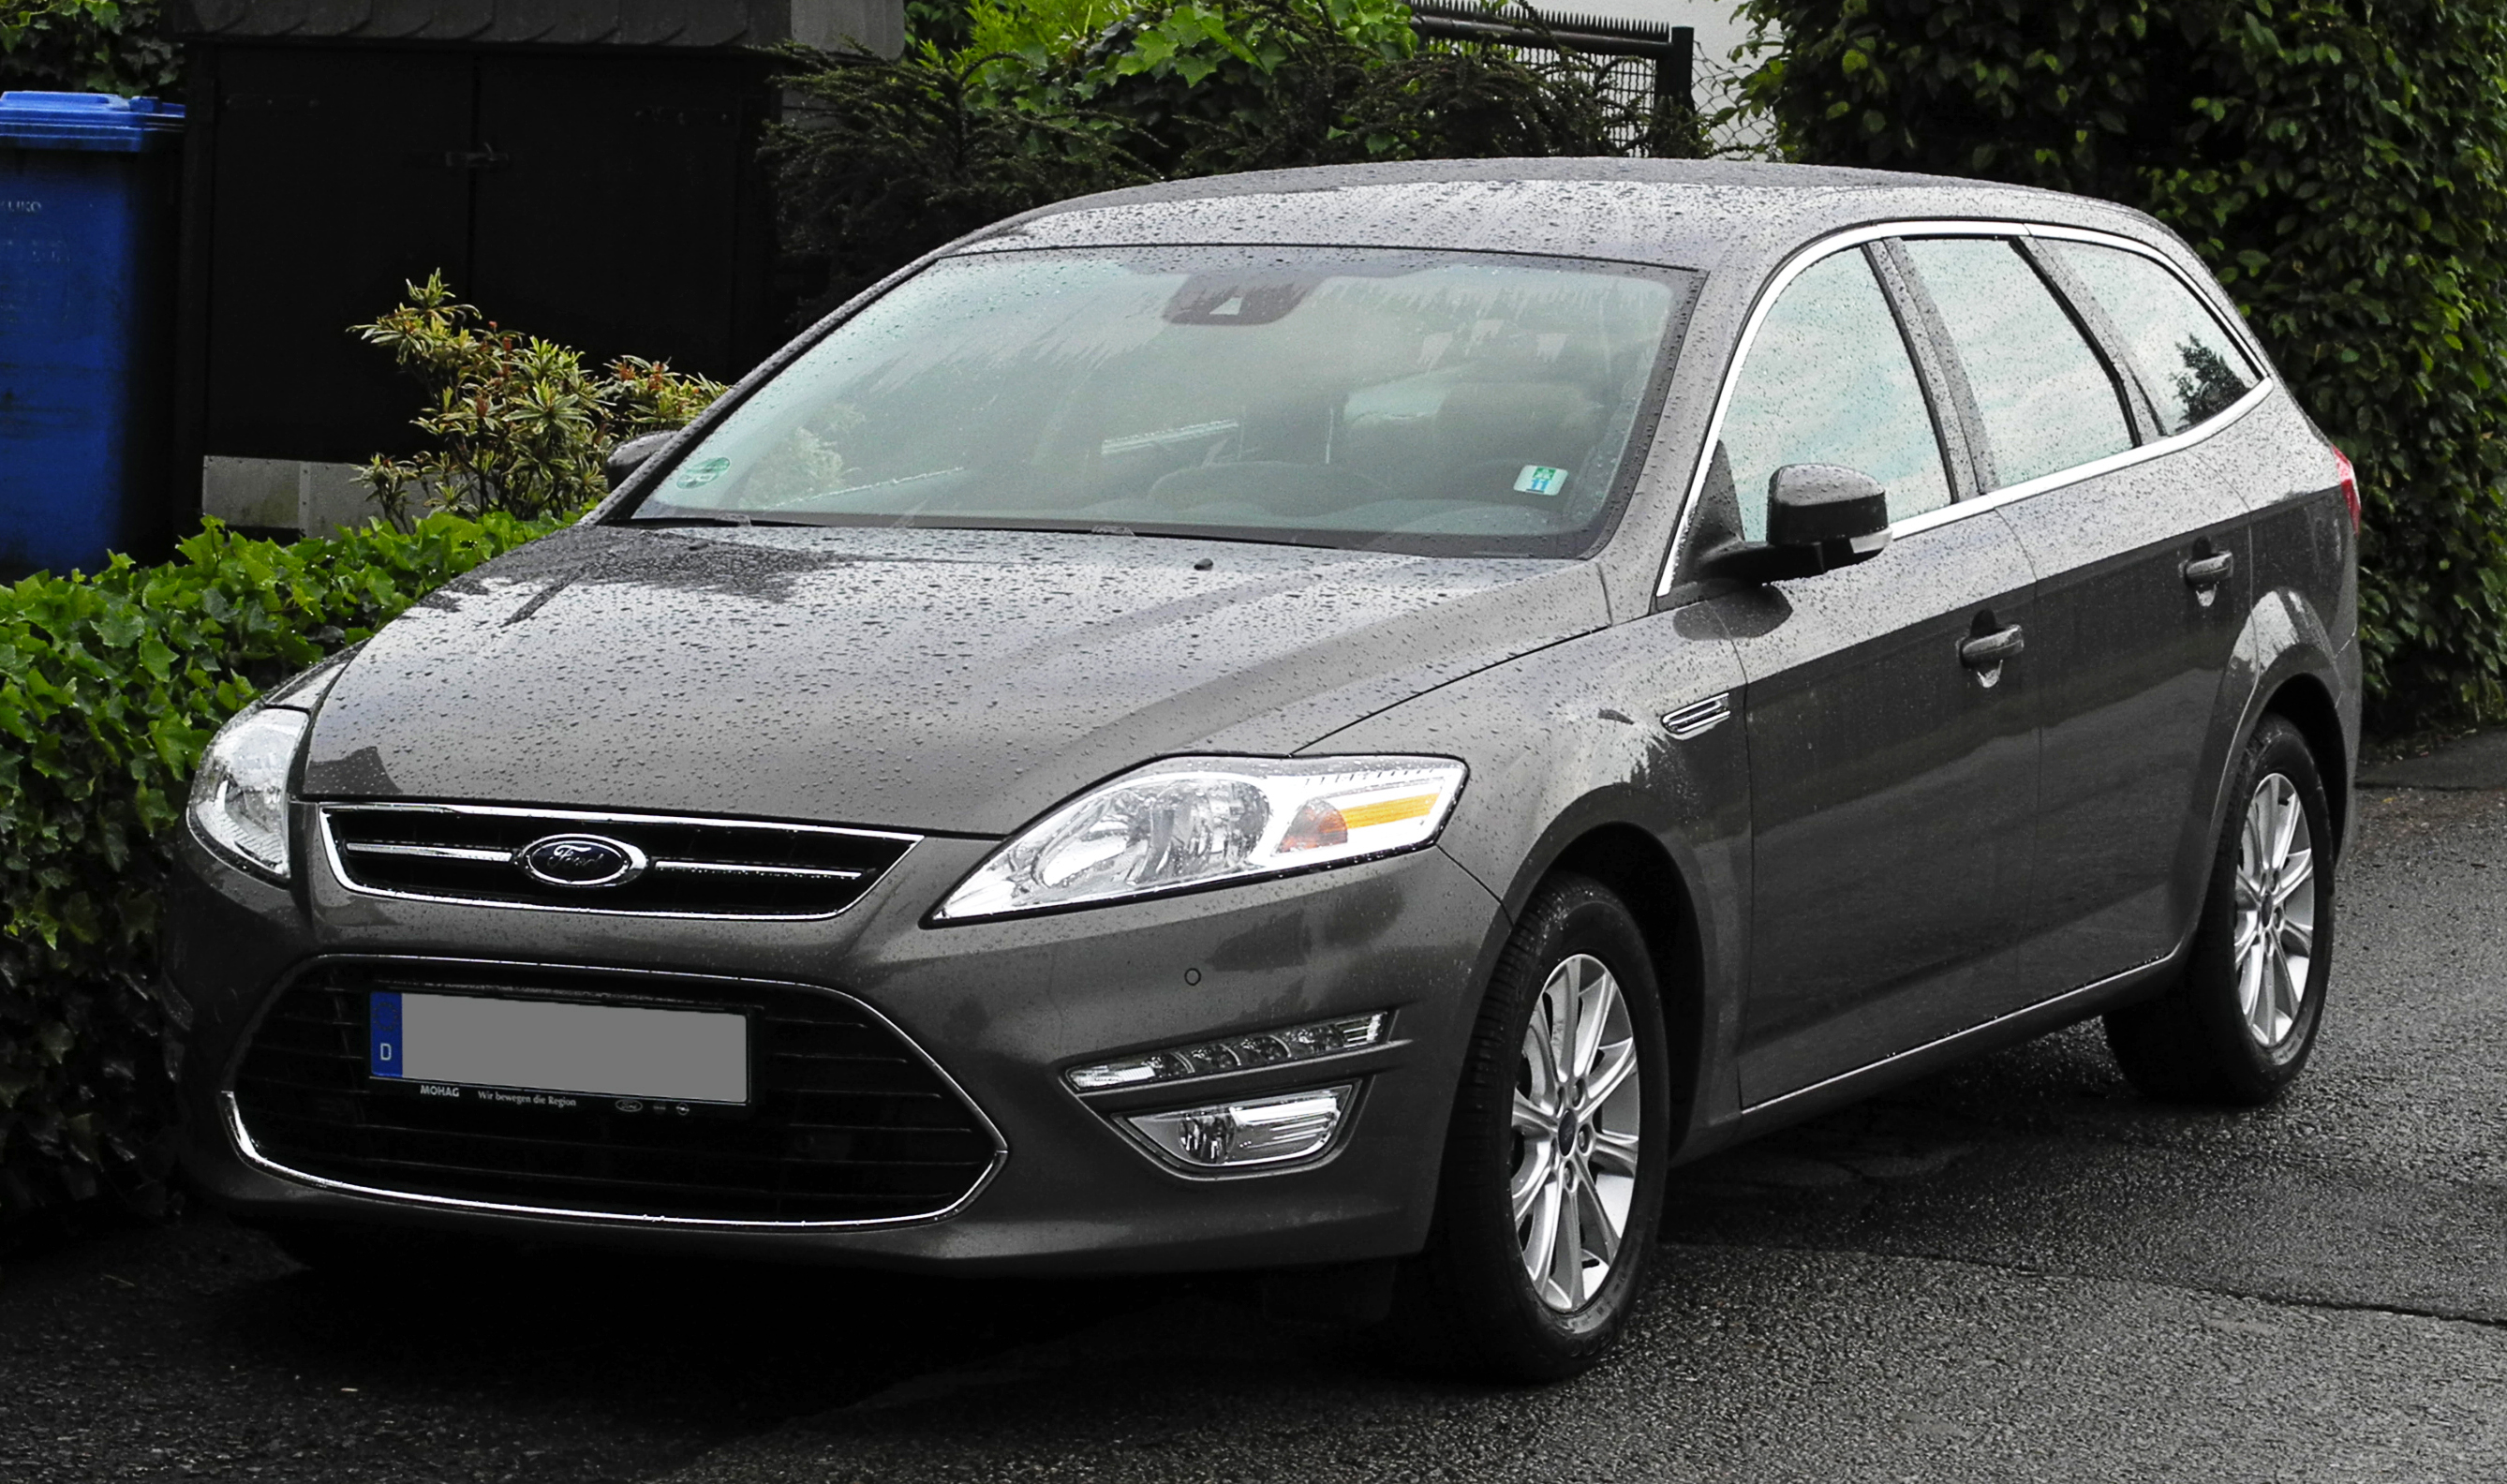 Ford Mondeo Turnier 2.0 TDCi technical details, history